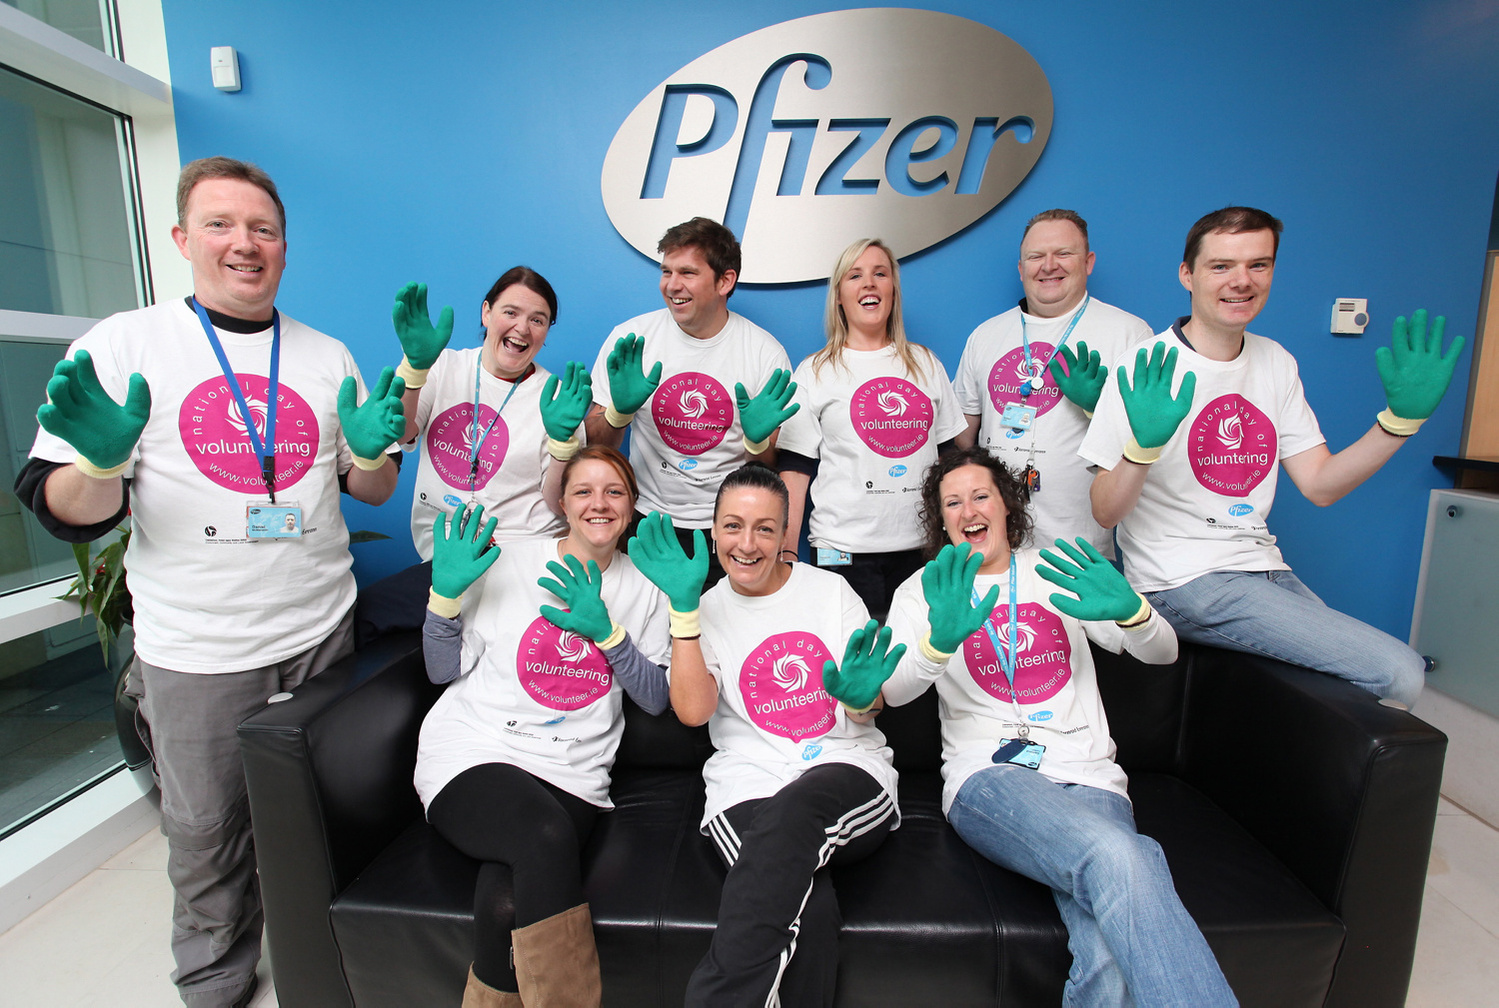 Large group photo of Pfizer corporate employees wearing branded t-shirts to celebrate National Day of Volunteering, professional event photographer Dublin